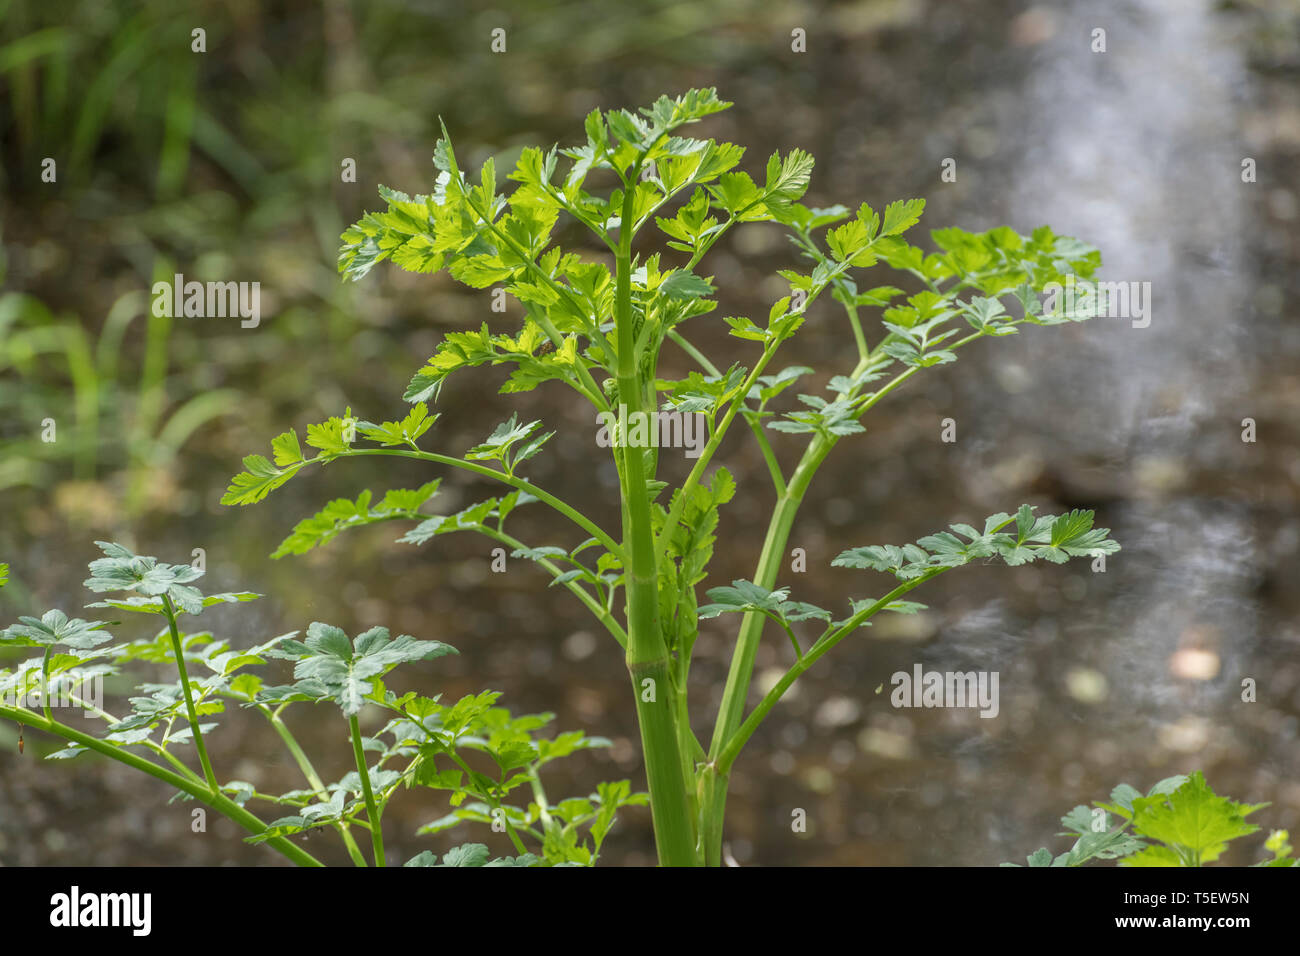 Young Spring foliage of a Hemlock Water-Dropwort / Oenanthe crocata plant beside a drainage ditch. Highly poisonous plant with affinity for water. Stock Photo